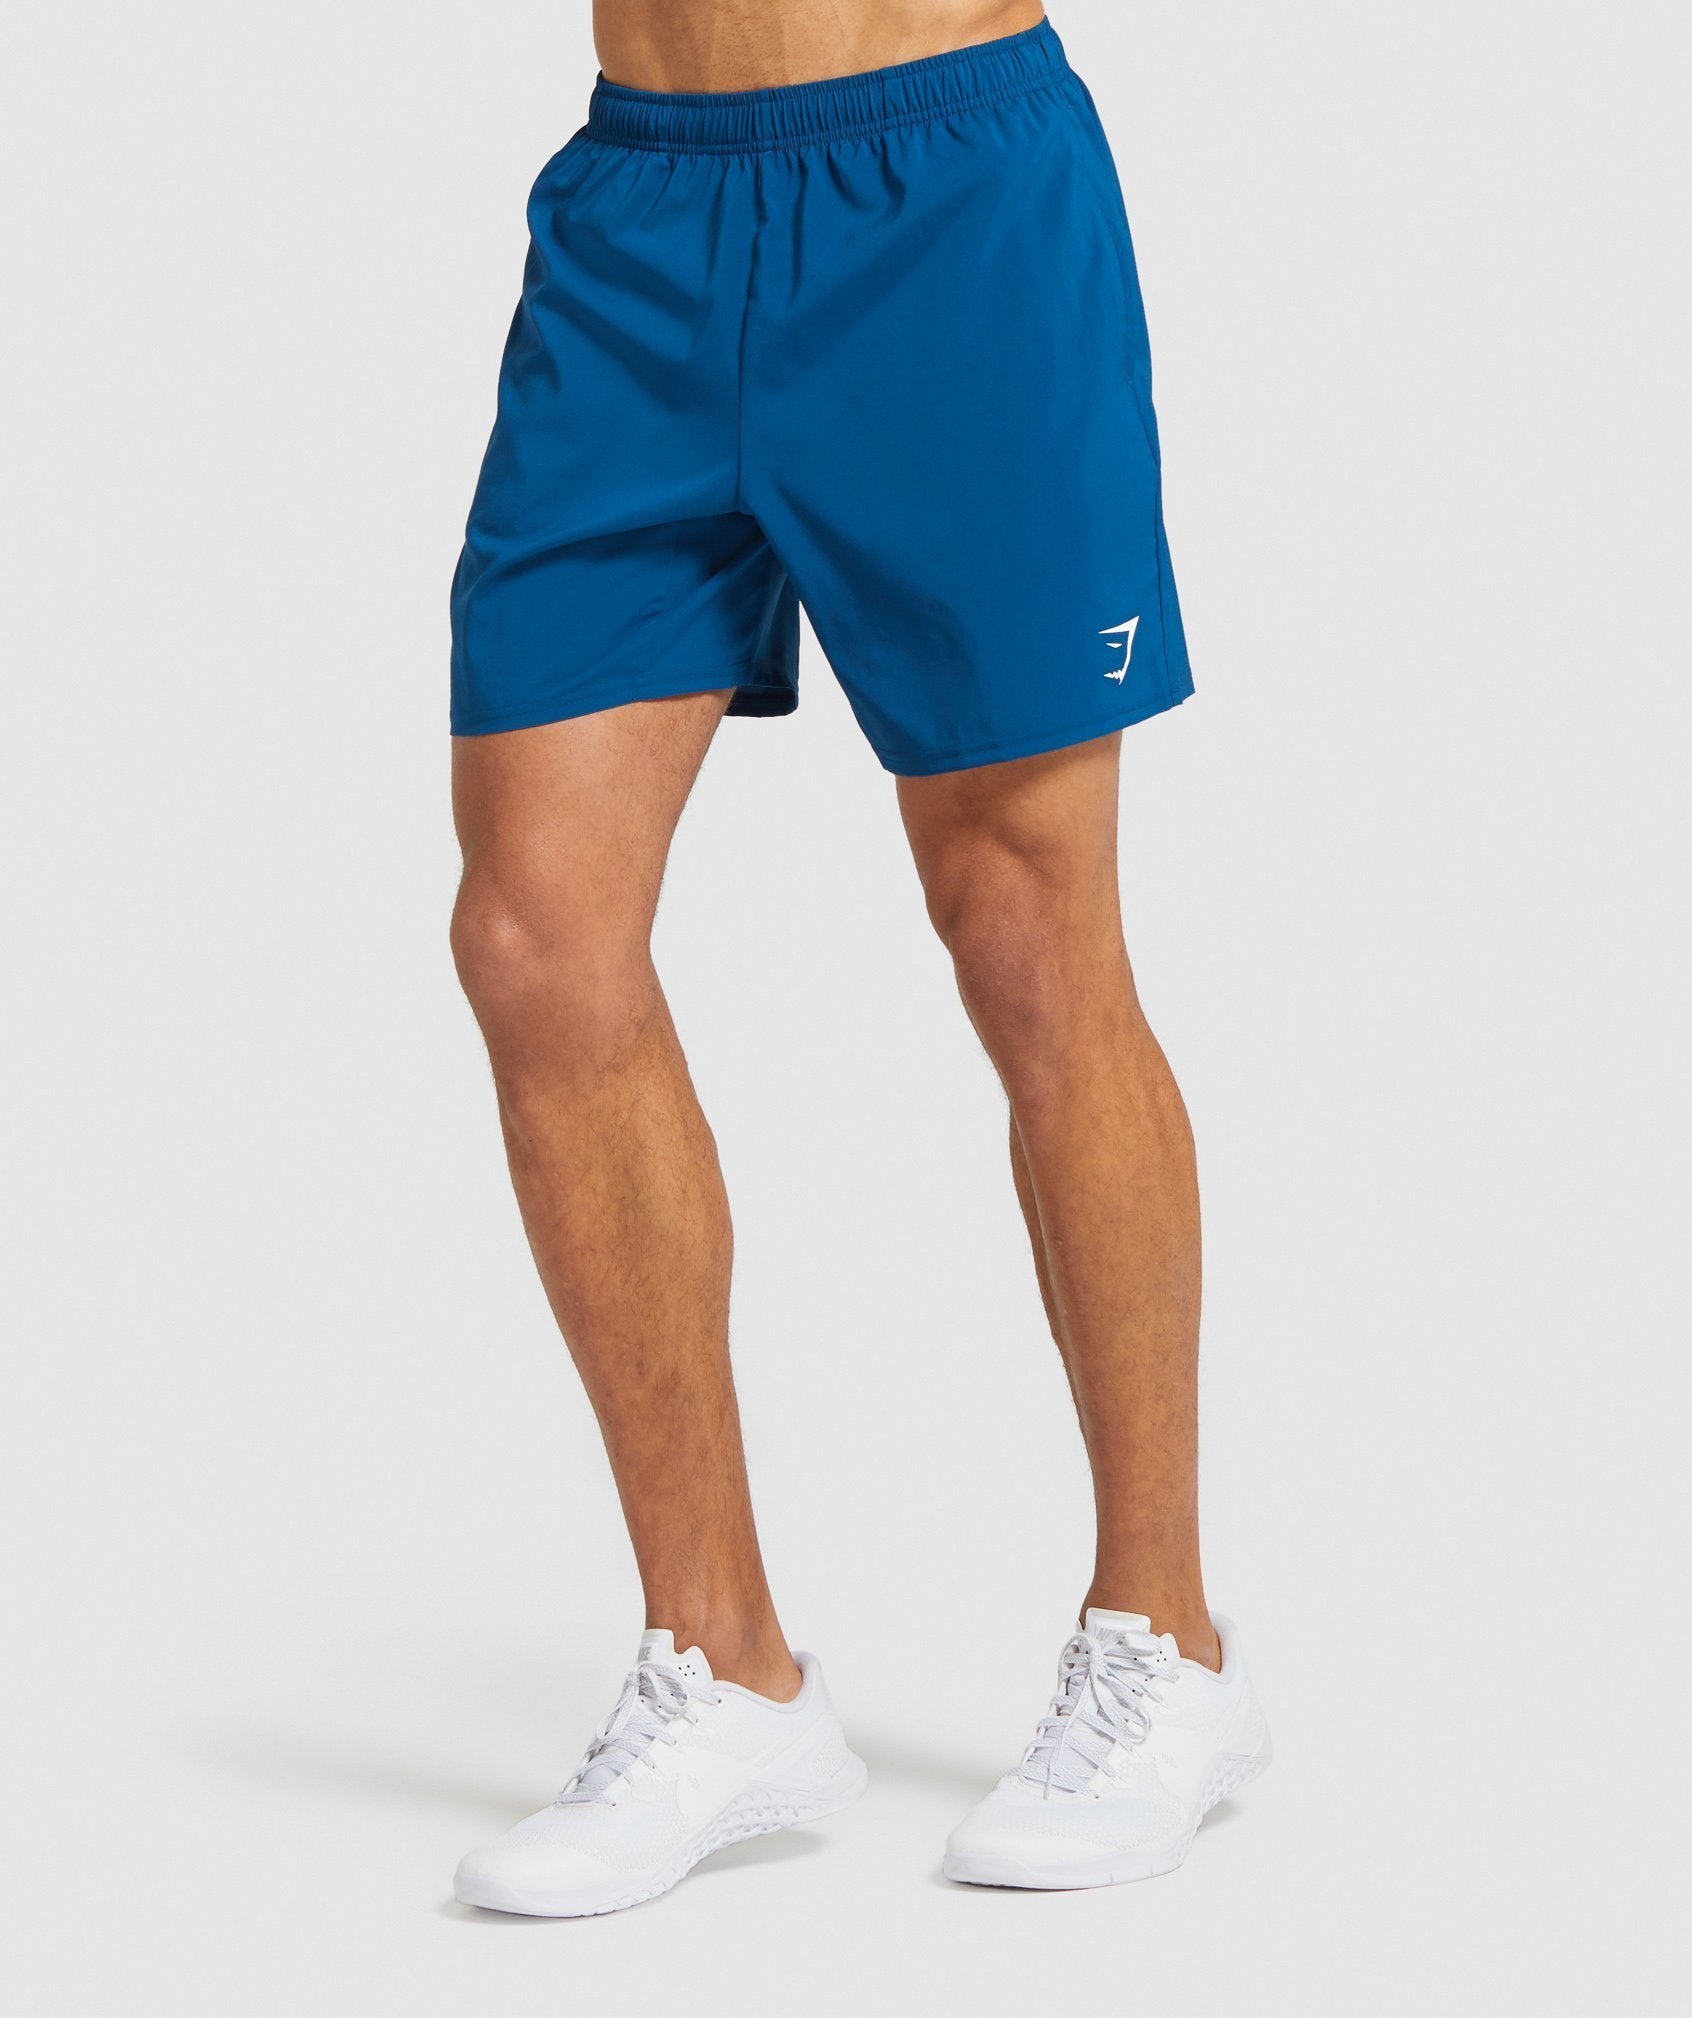 Arrival Shorts in Petrol Blue - view 1